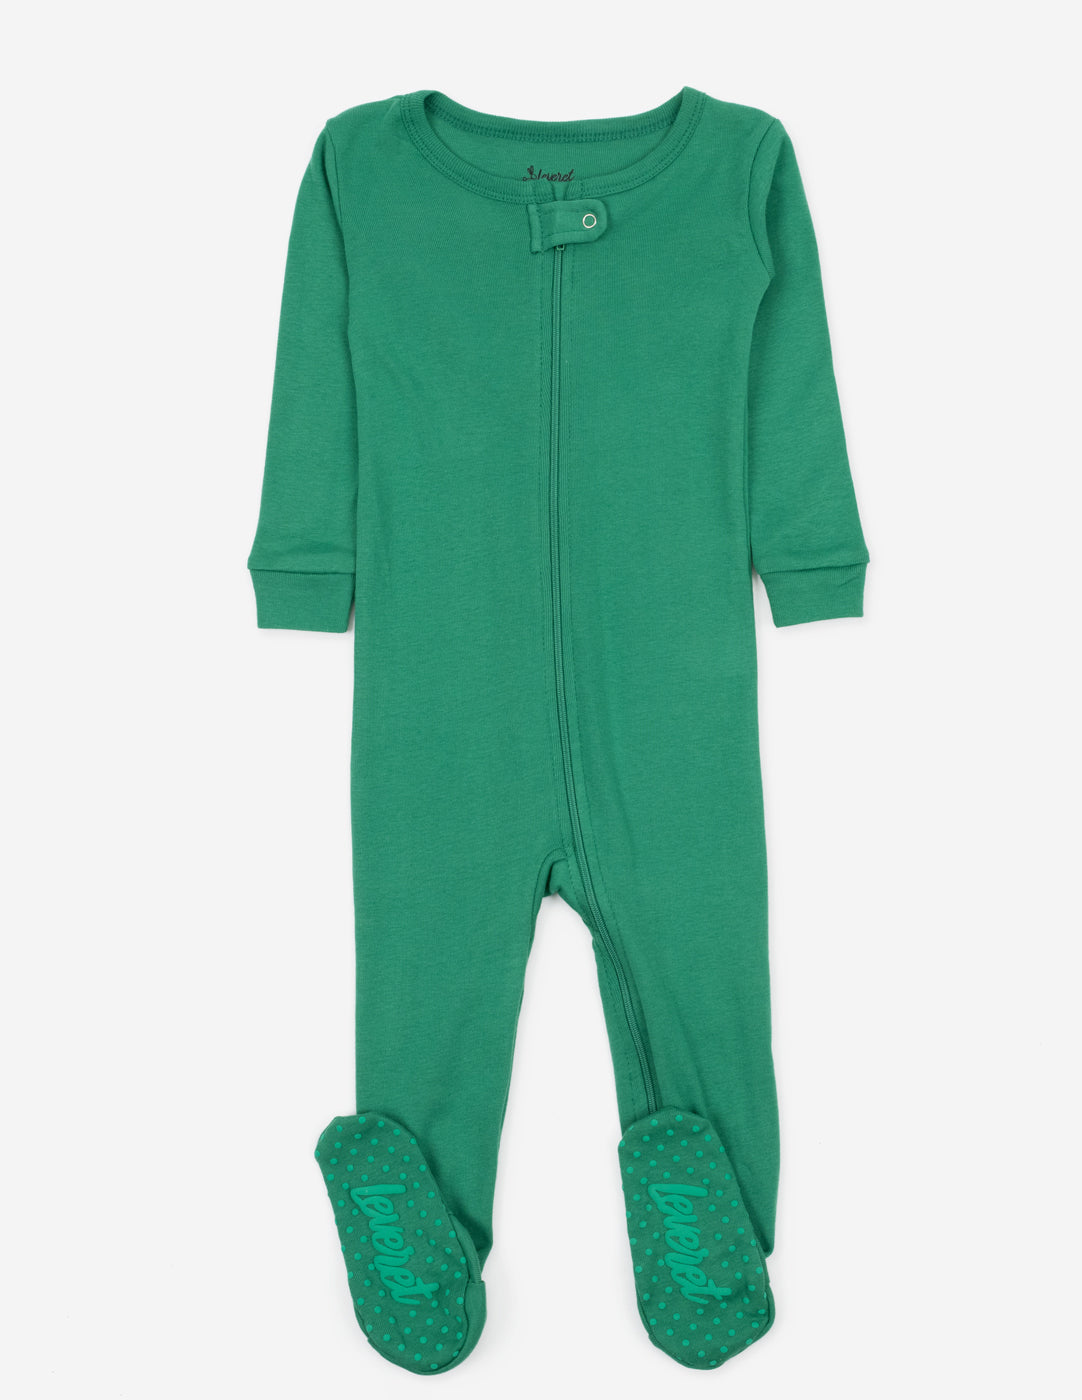 solid color green baby footed pajamas